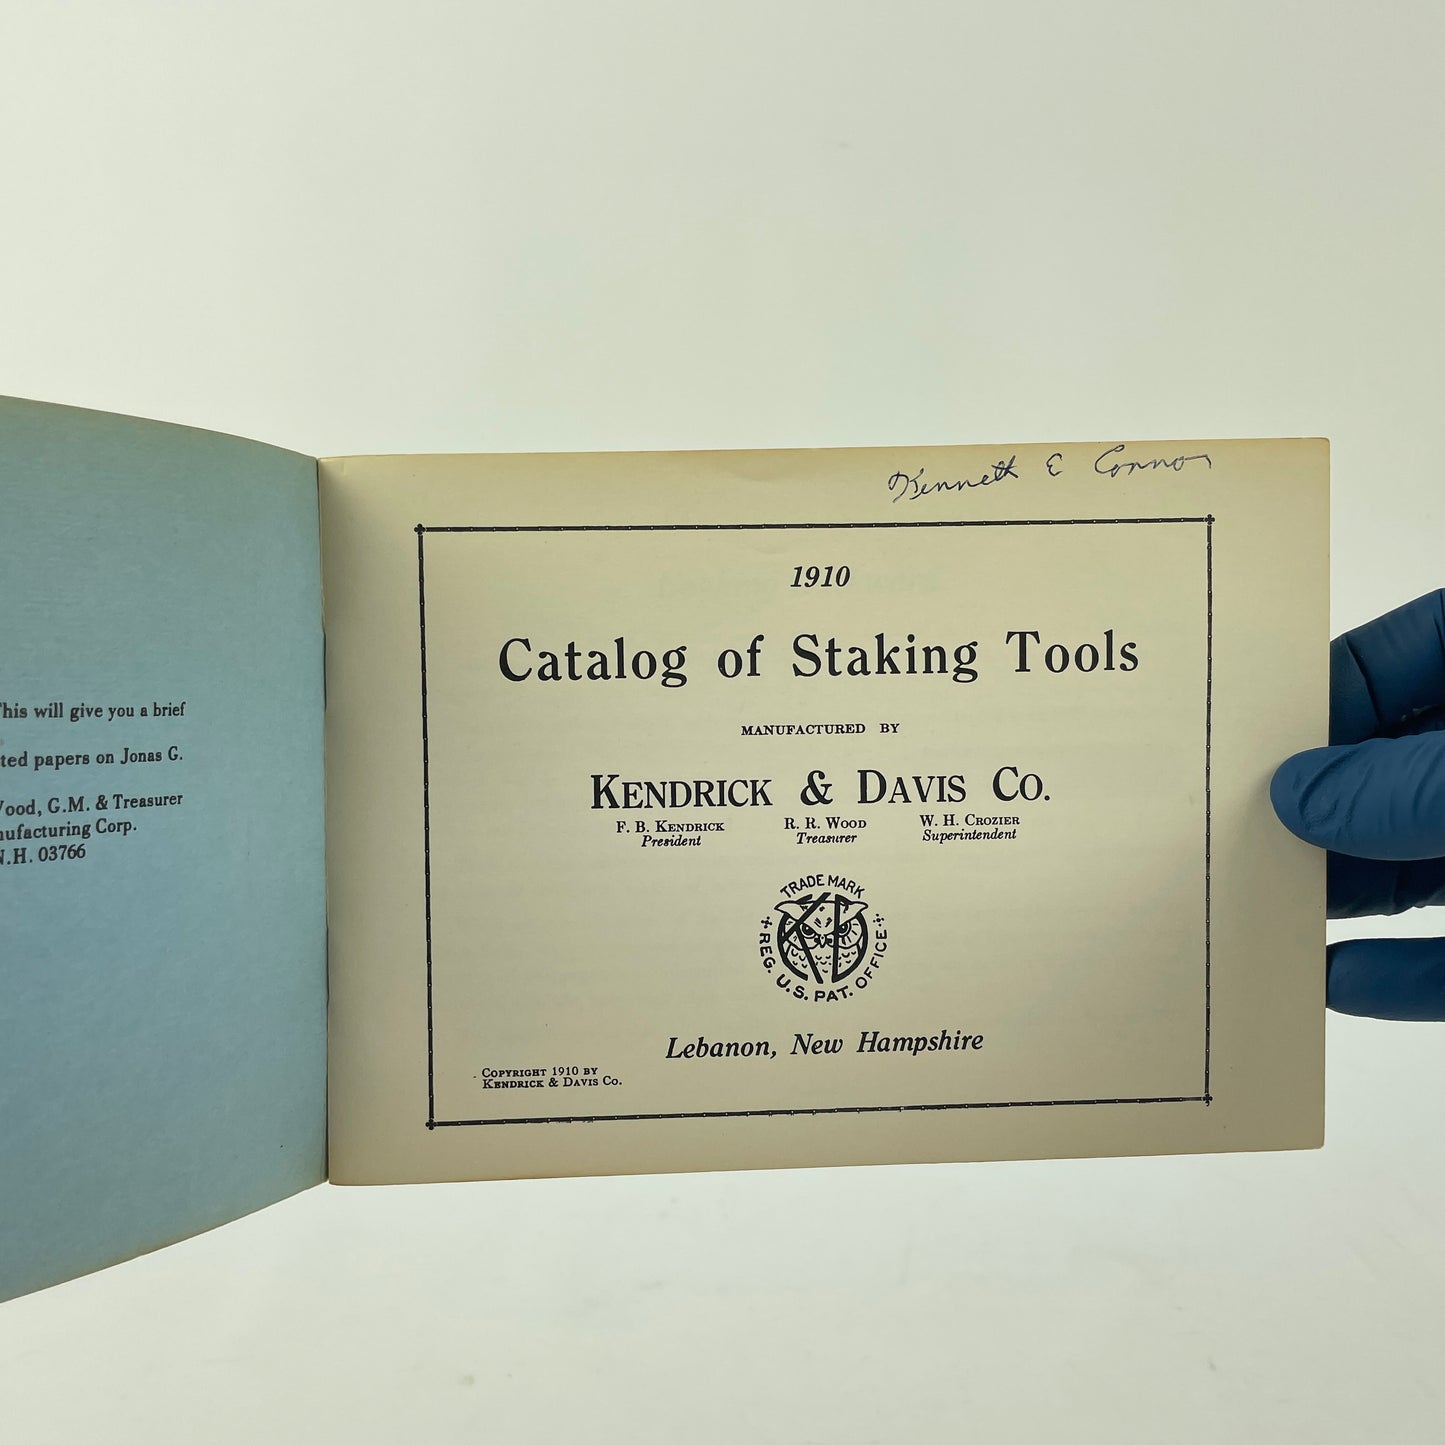 Mar Lot 14- Staking Tools And How To Use Them Catalog